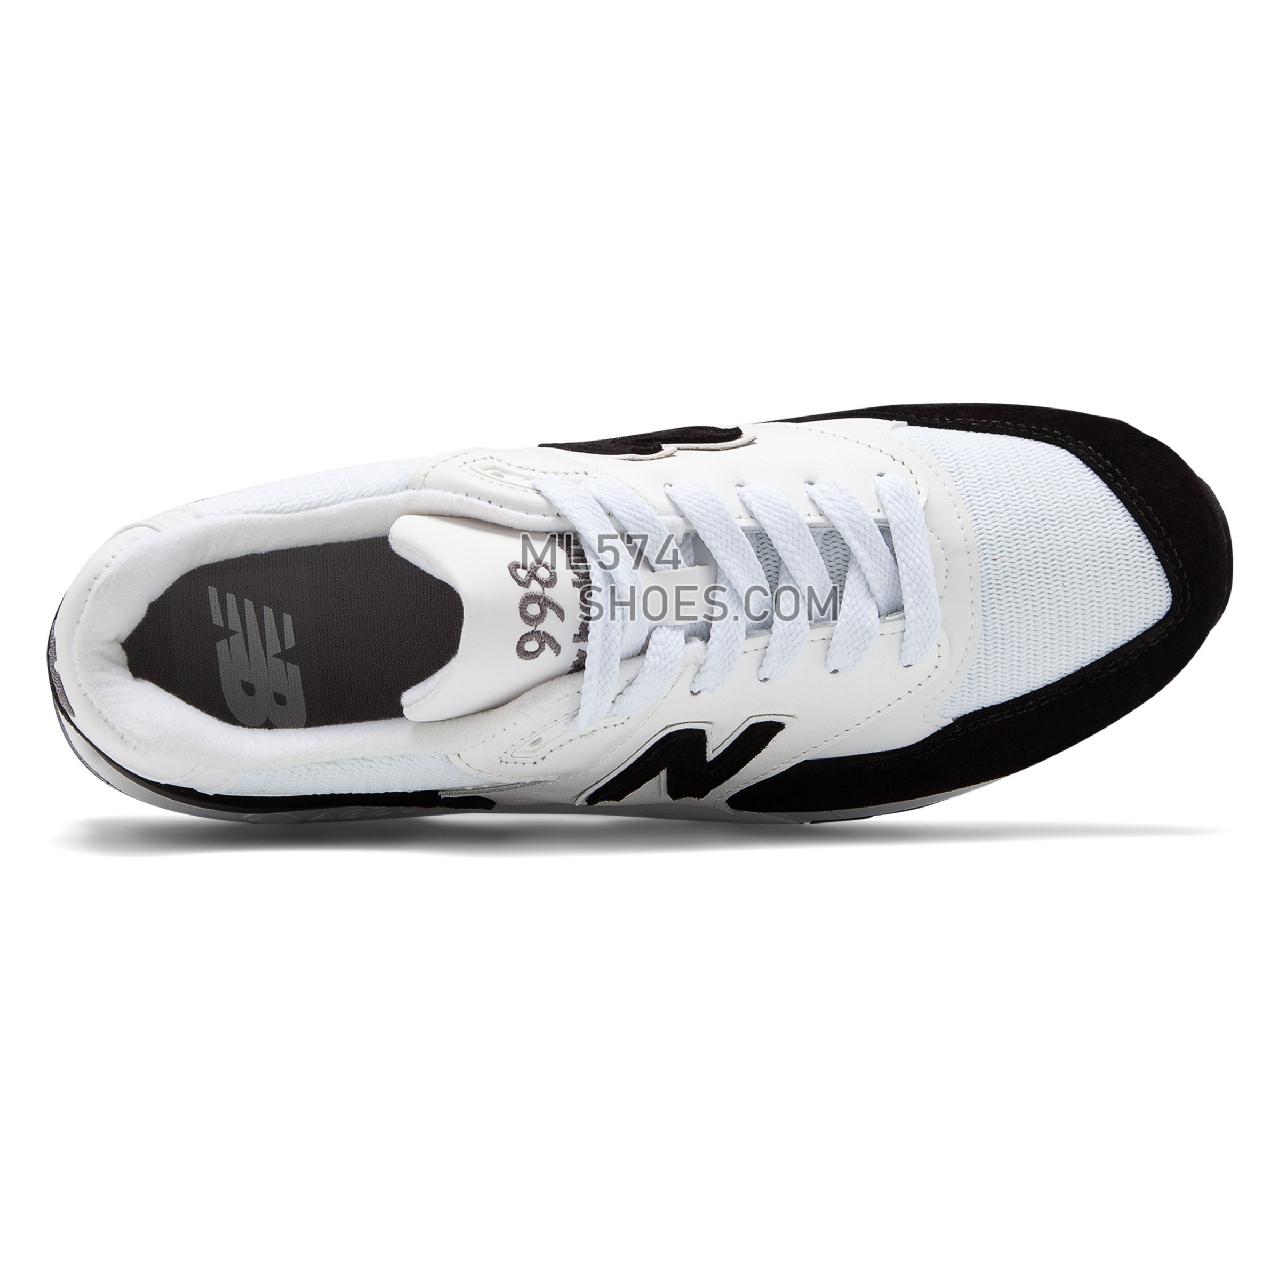 New Balance Made in US 998 - Men's Made in US 998 - Black with White - M998PSC